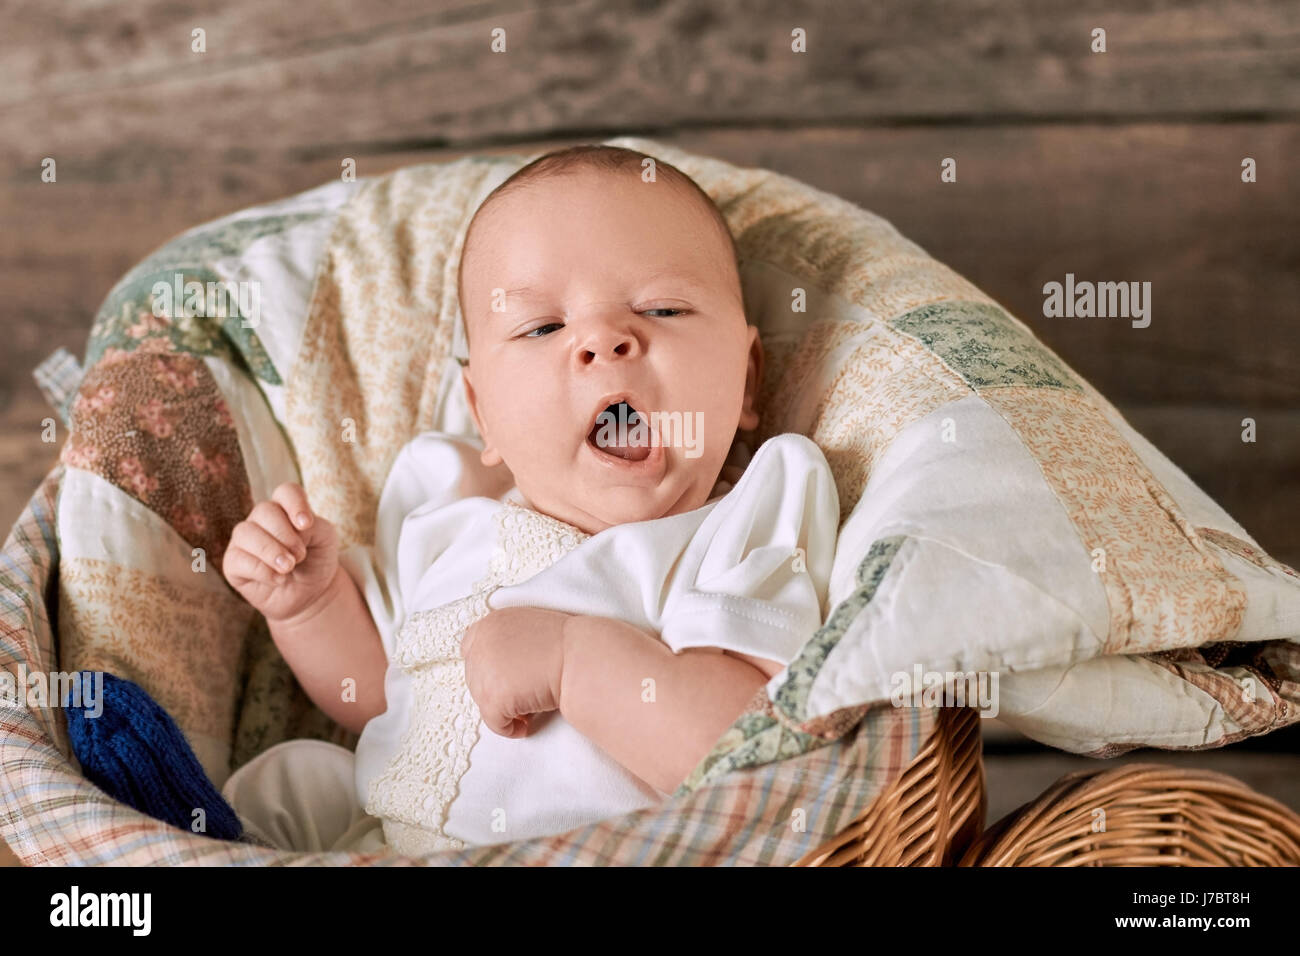 Baby is yawning. Infant with mouth open. Tiredness and boredom. Stock Photo